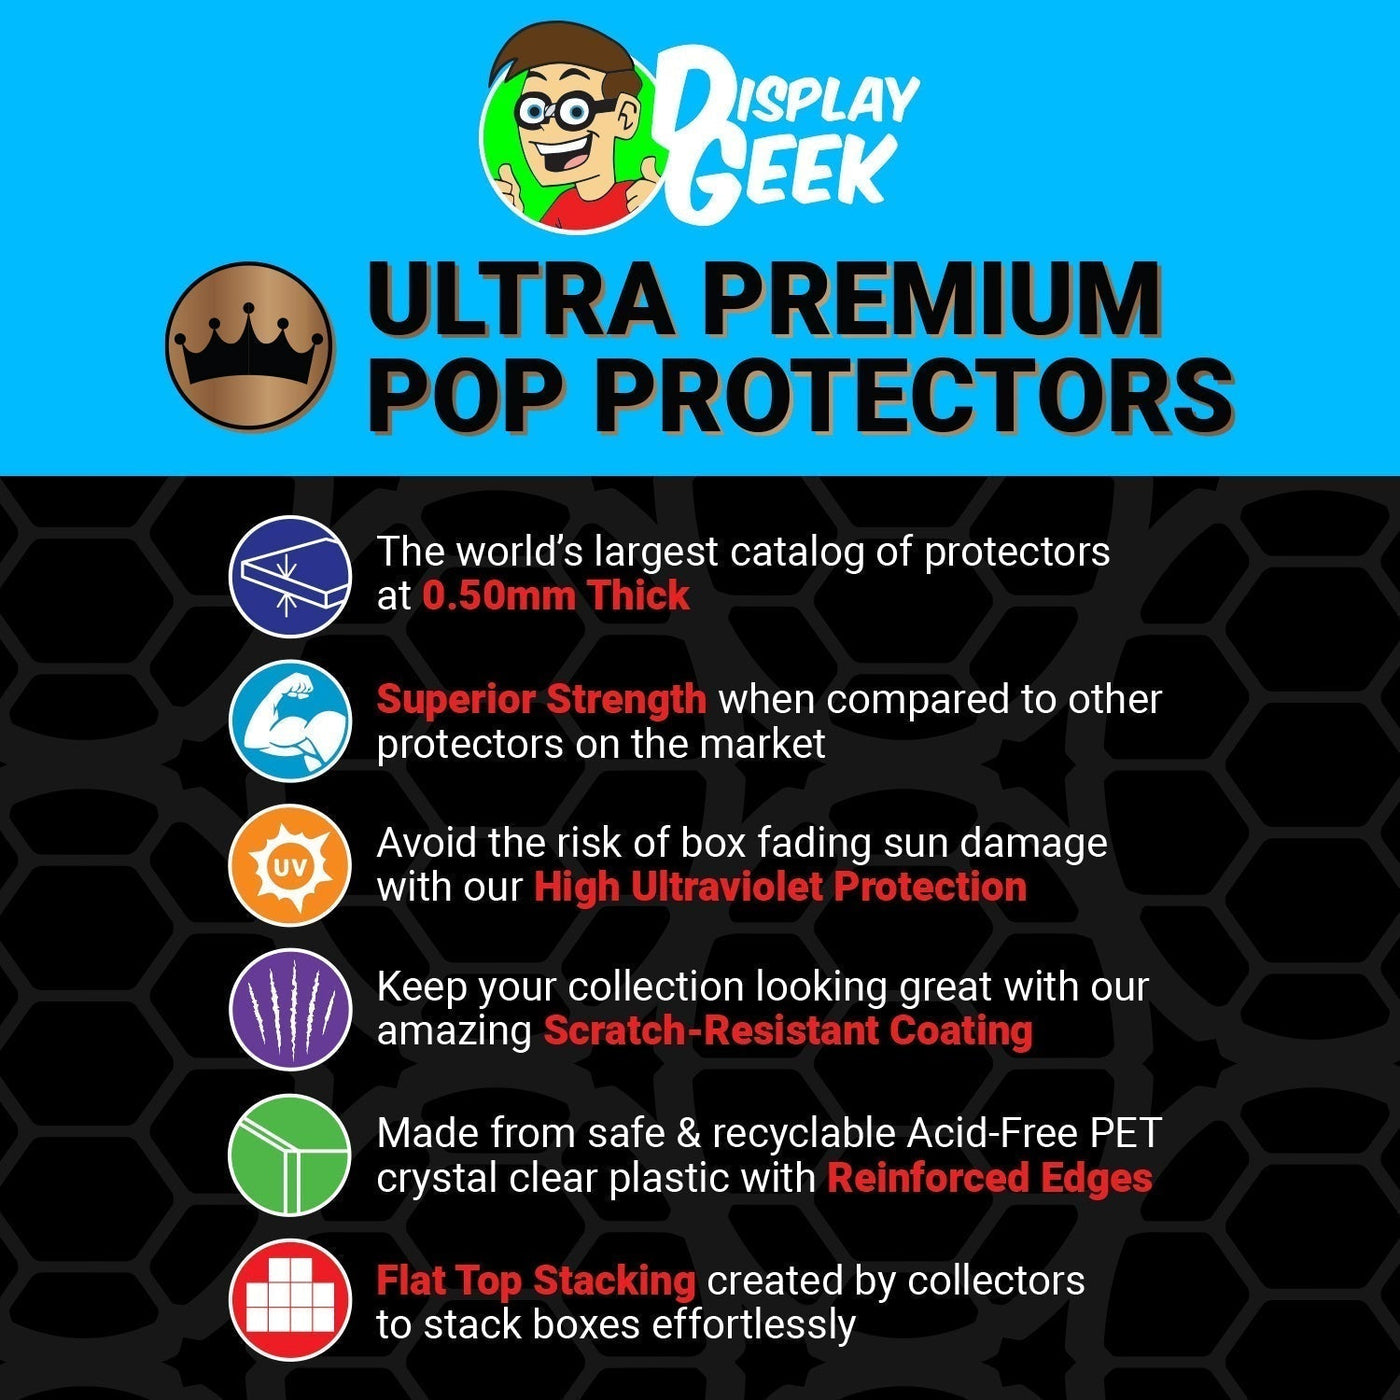 Pop Protector for The Sanderson Sisters Singing #1202 Funko Pop Moment on The Protector Guide App by Display Geek